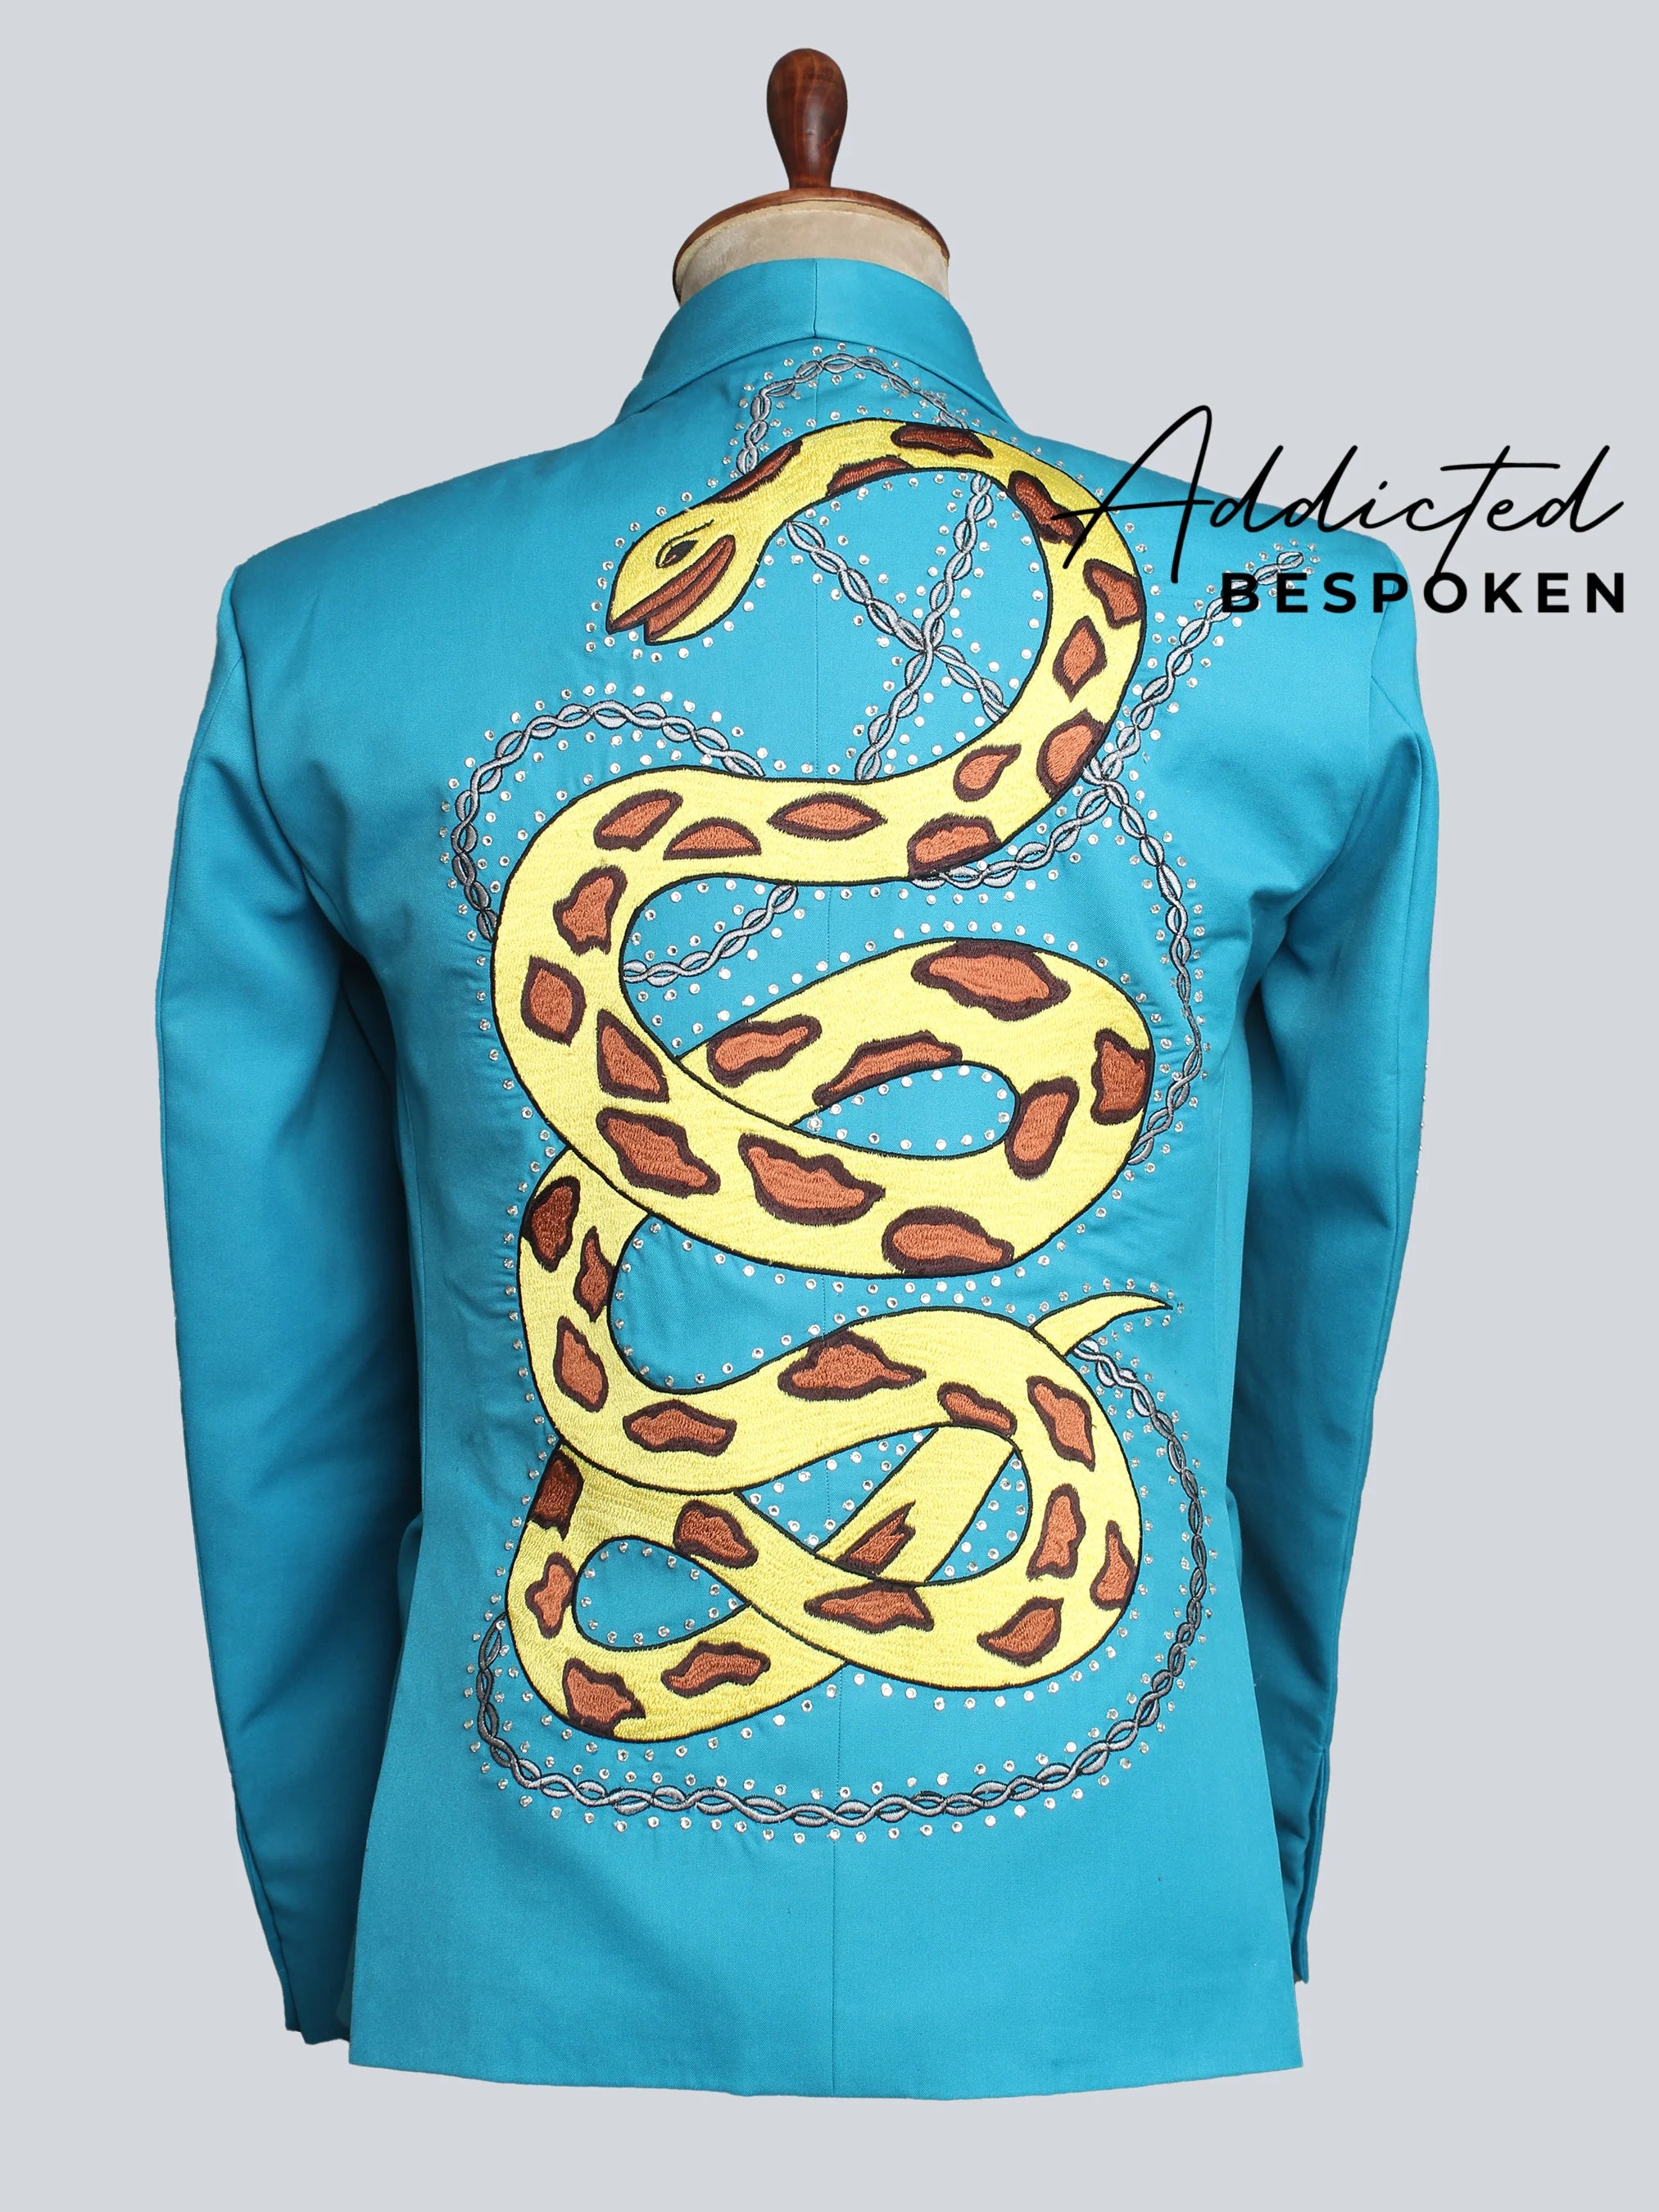 Aesthetic Blue Snake Suit